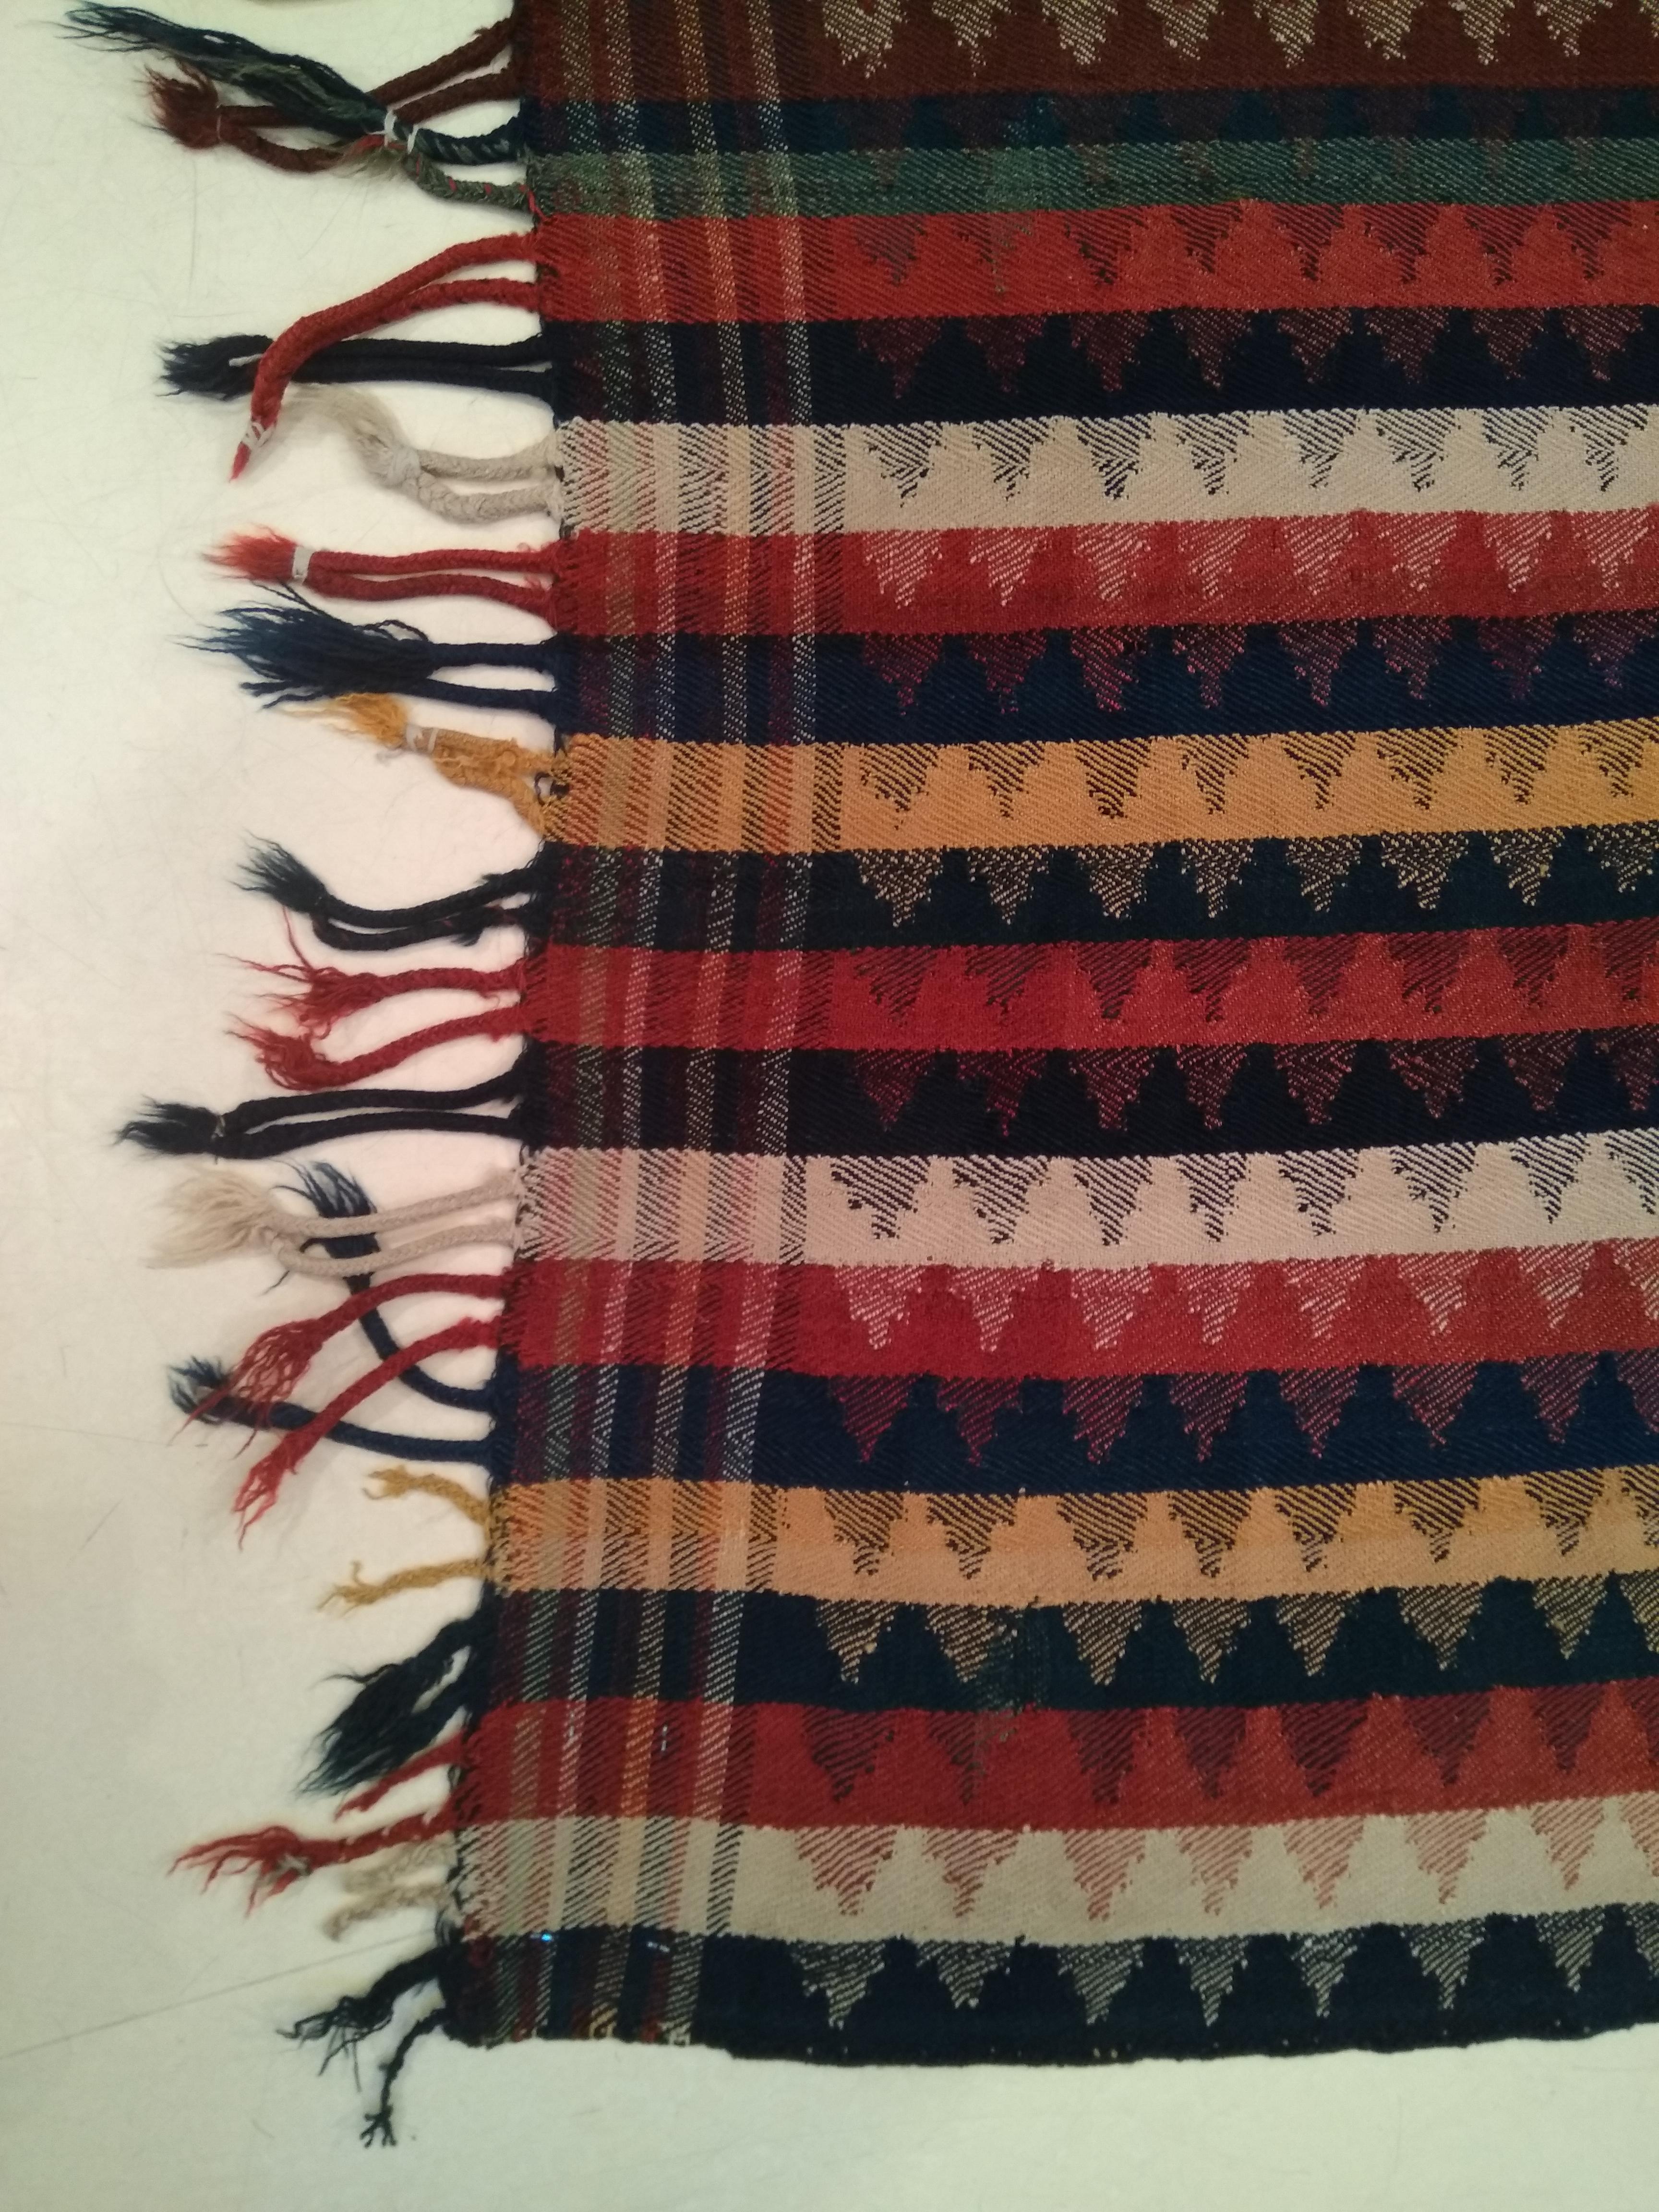 Antique Flat-Woven Azeri Shaddah Kilim Rug In Good Condition For Sale In Milan, IT